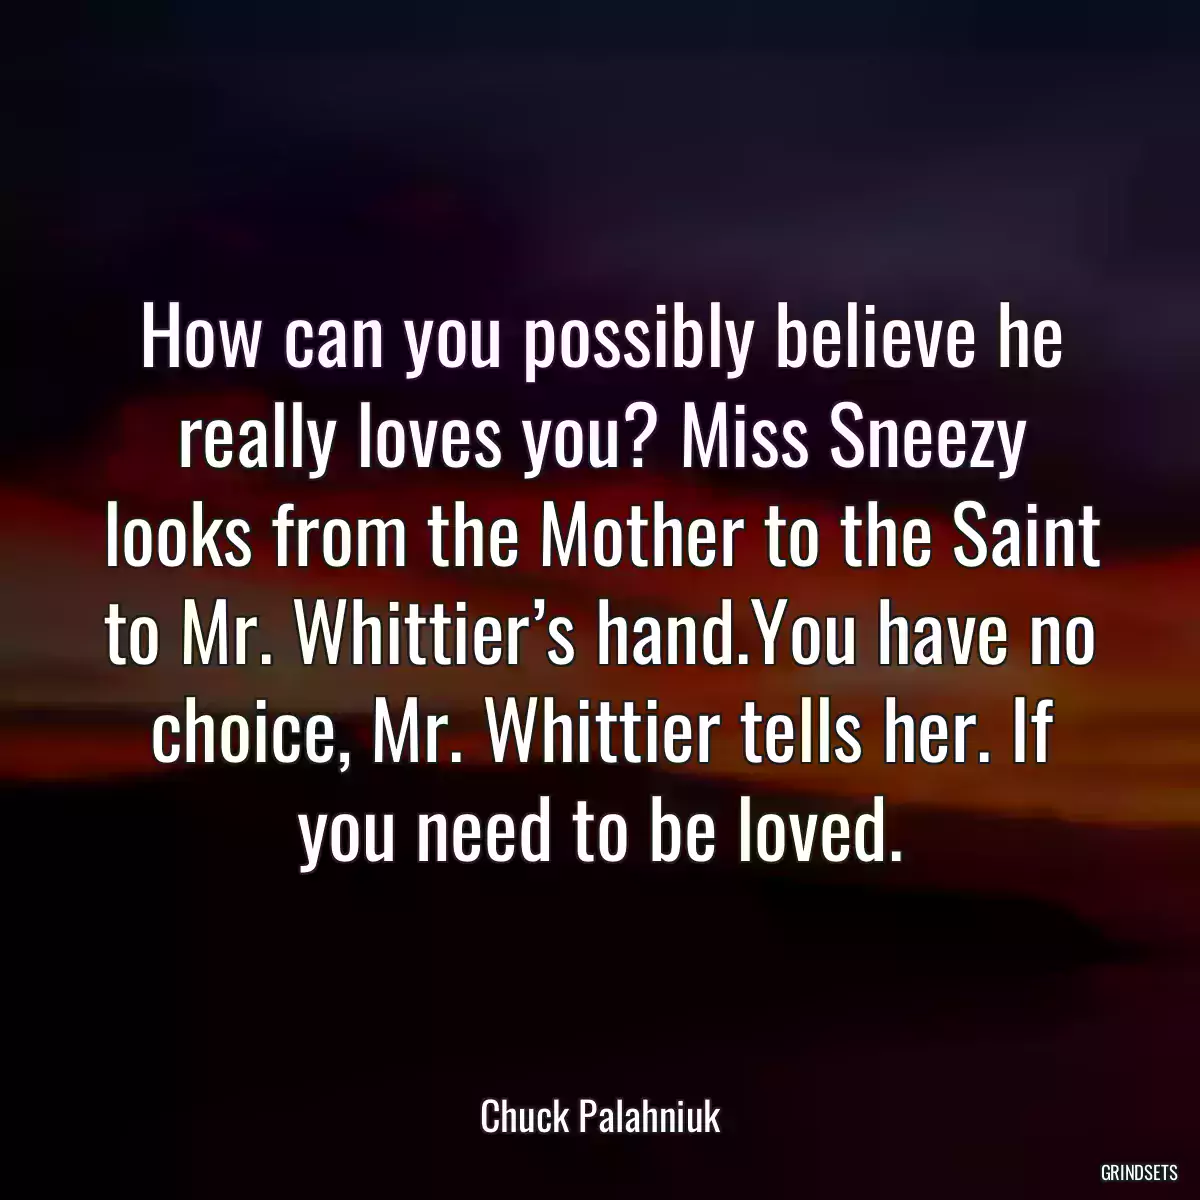 How can you possibly believe he really loves you? Miss Sneezy looks from the Mother to the Saint to Mr. Whittier’s hand.You have no choice, Mr. Whittier tells her. If you need to be loved.